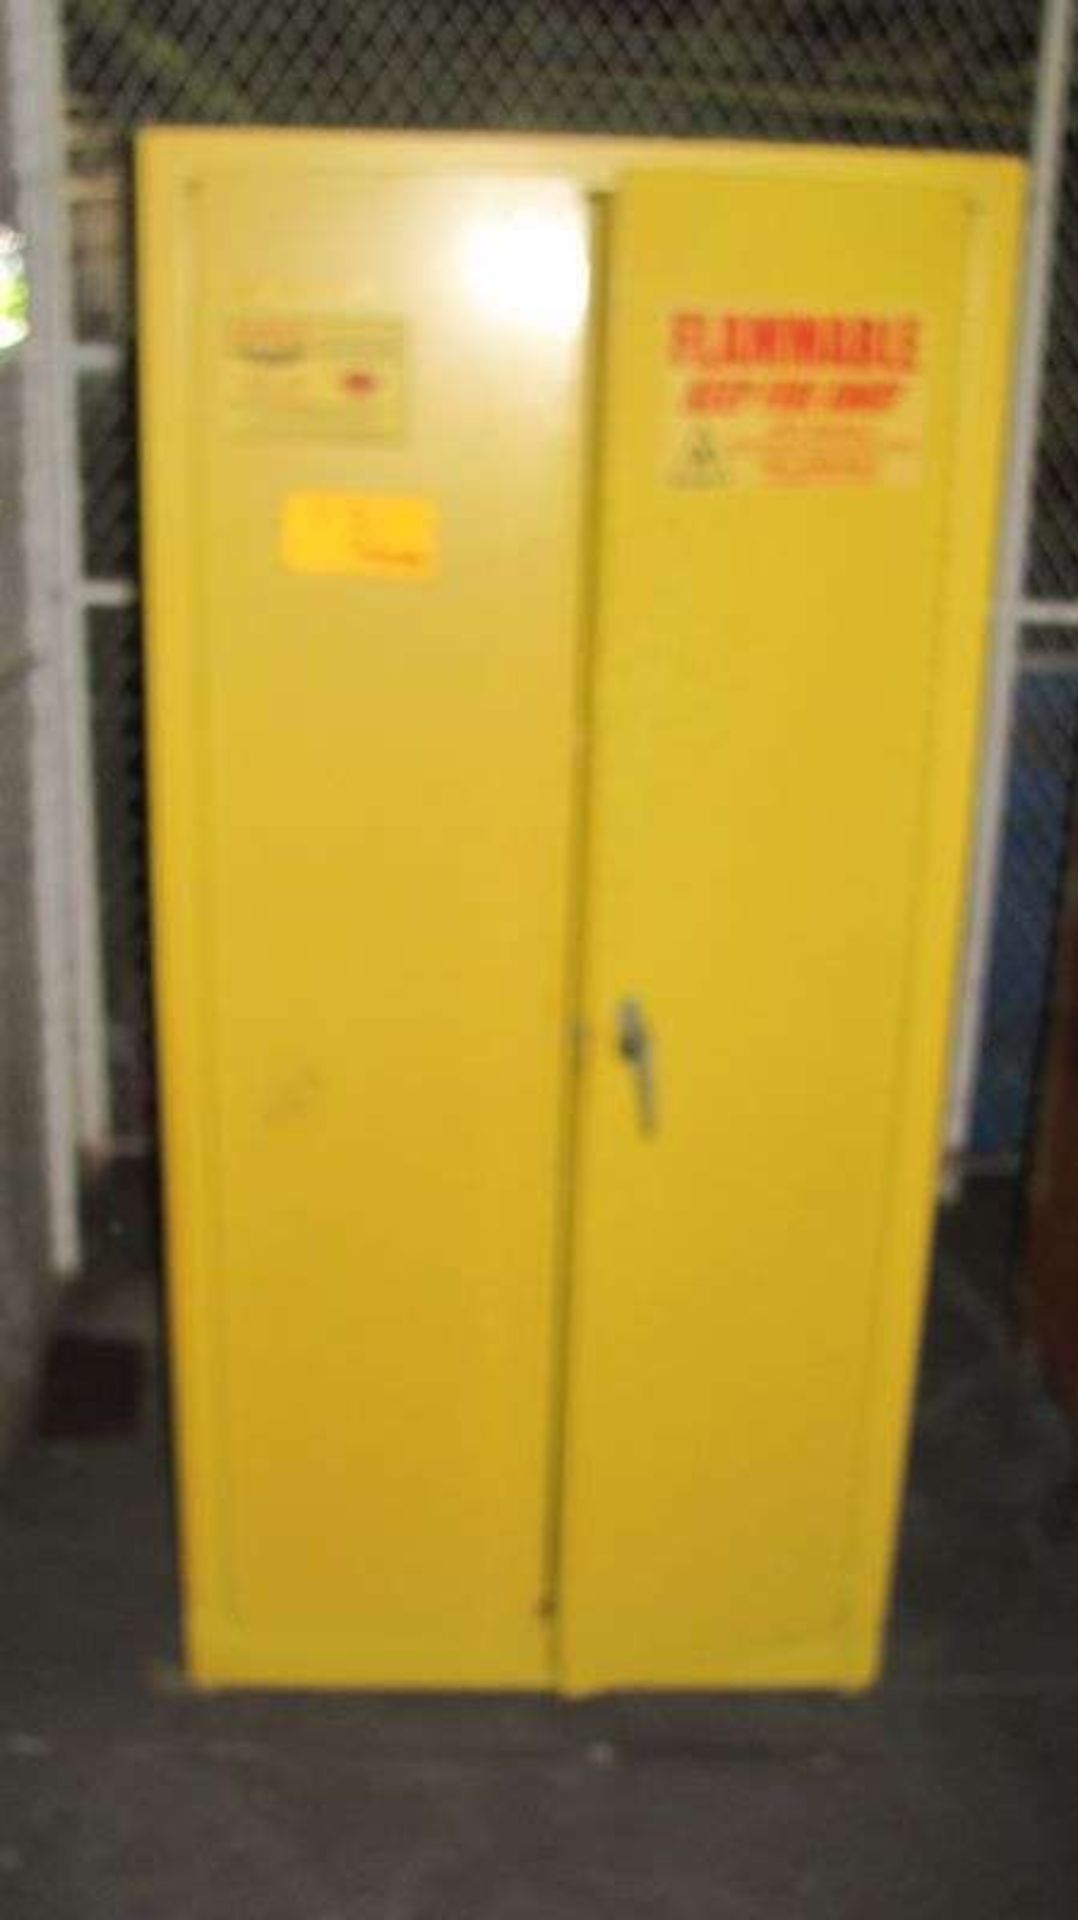 Eagle Flammable Storage Cabinet